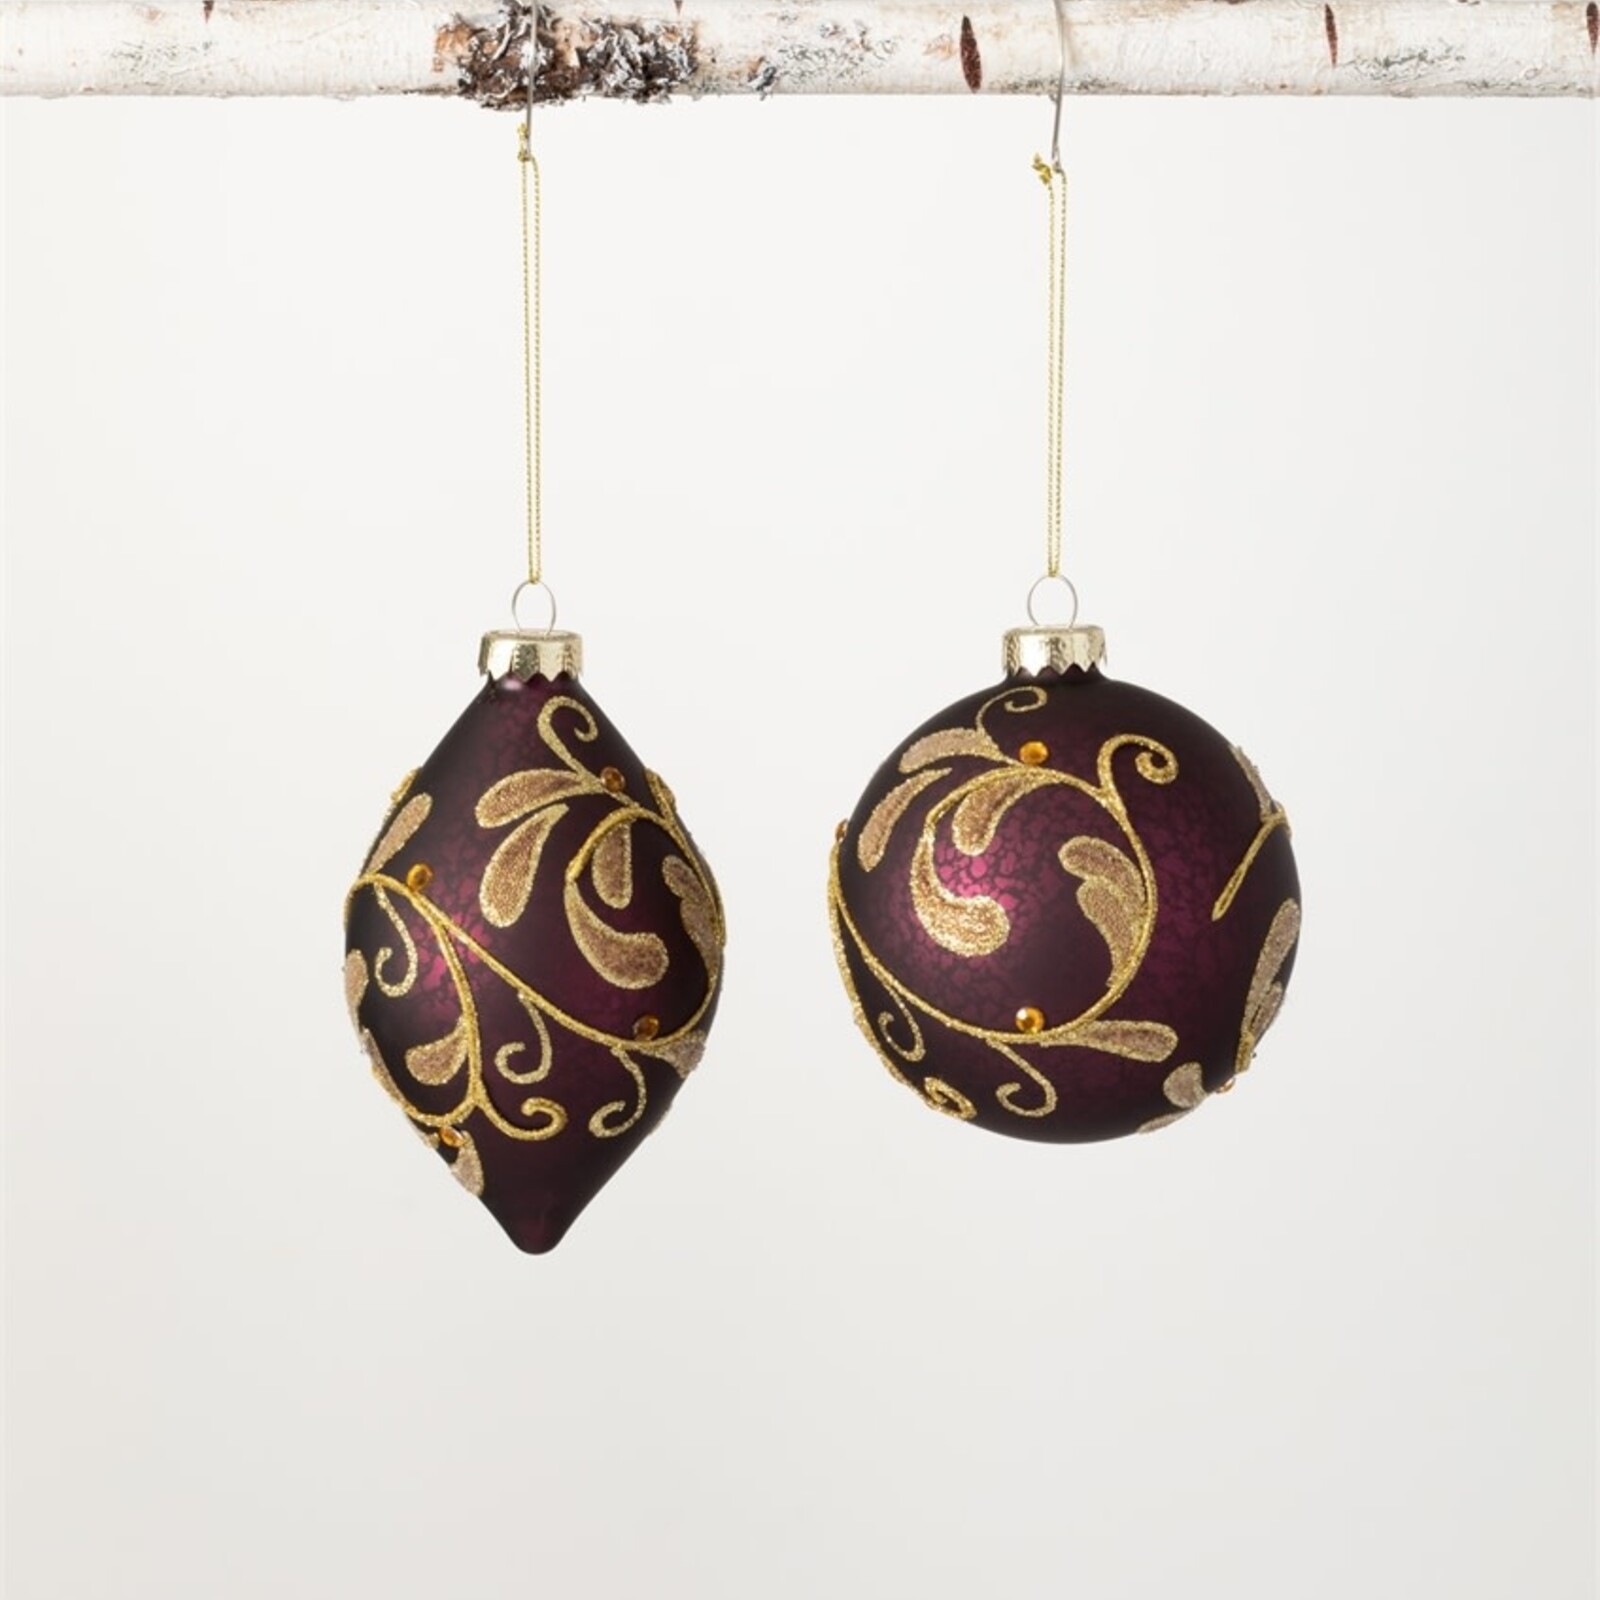 Sullivans BALL AND DROP ORNAMENT  OR9942 loading=